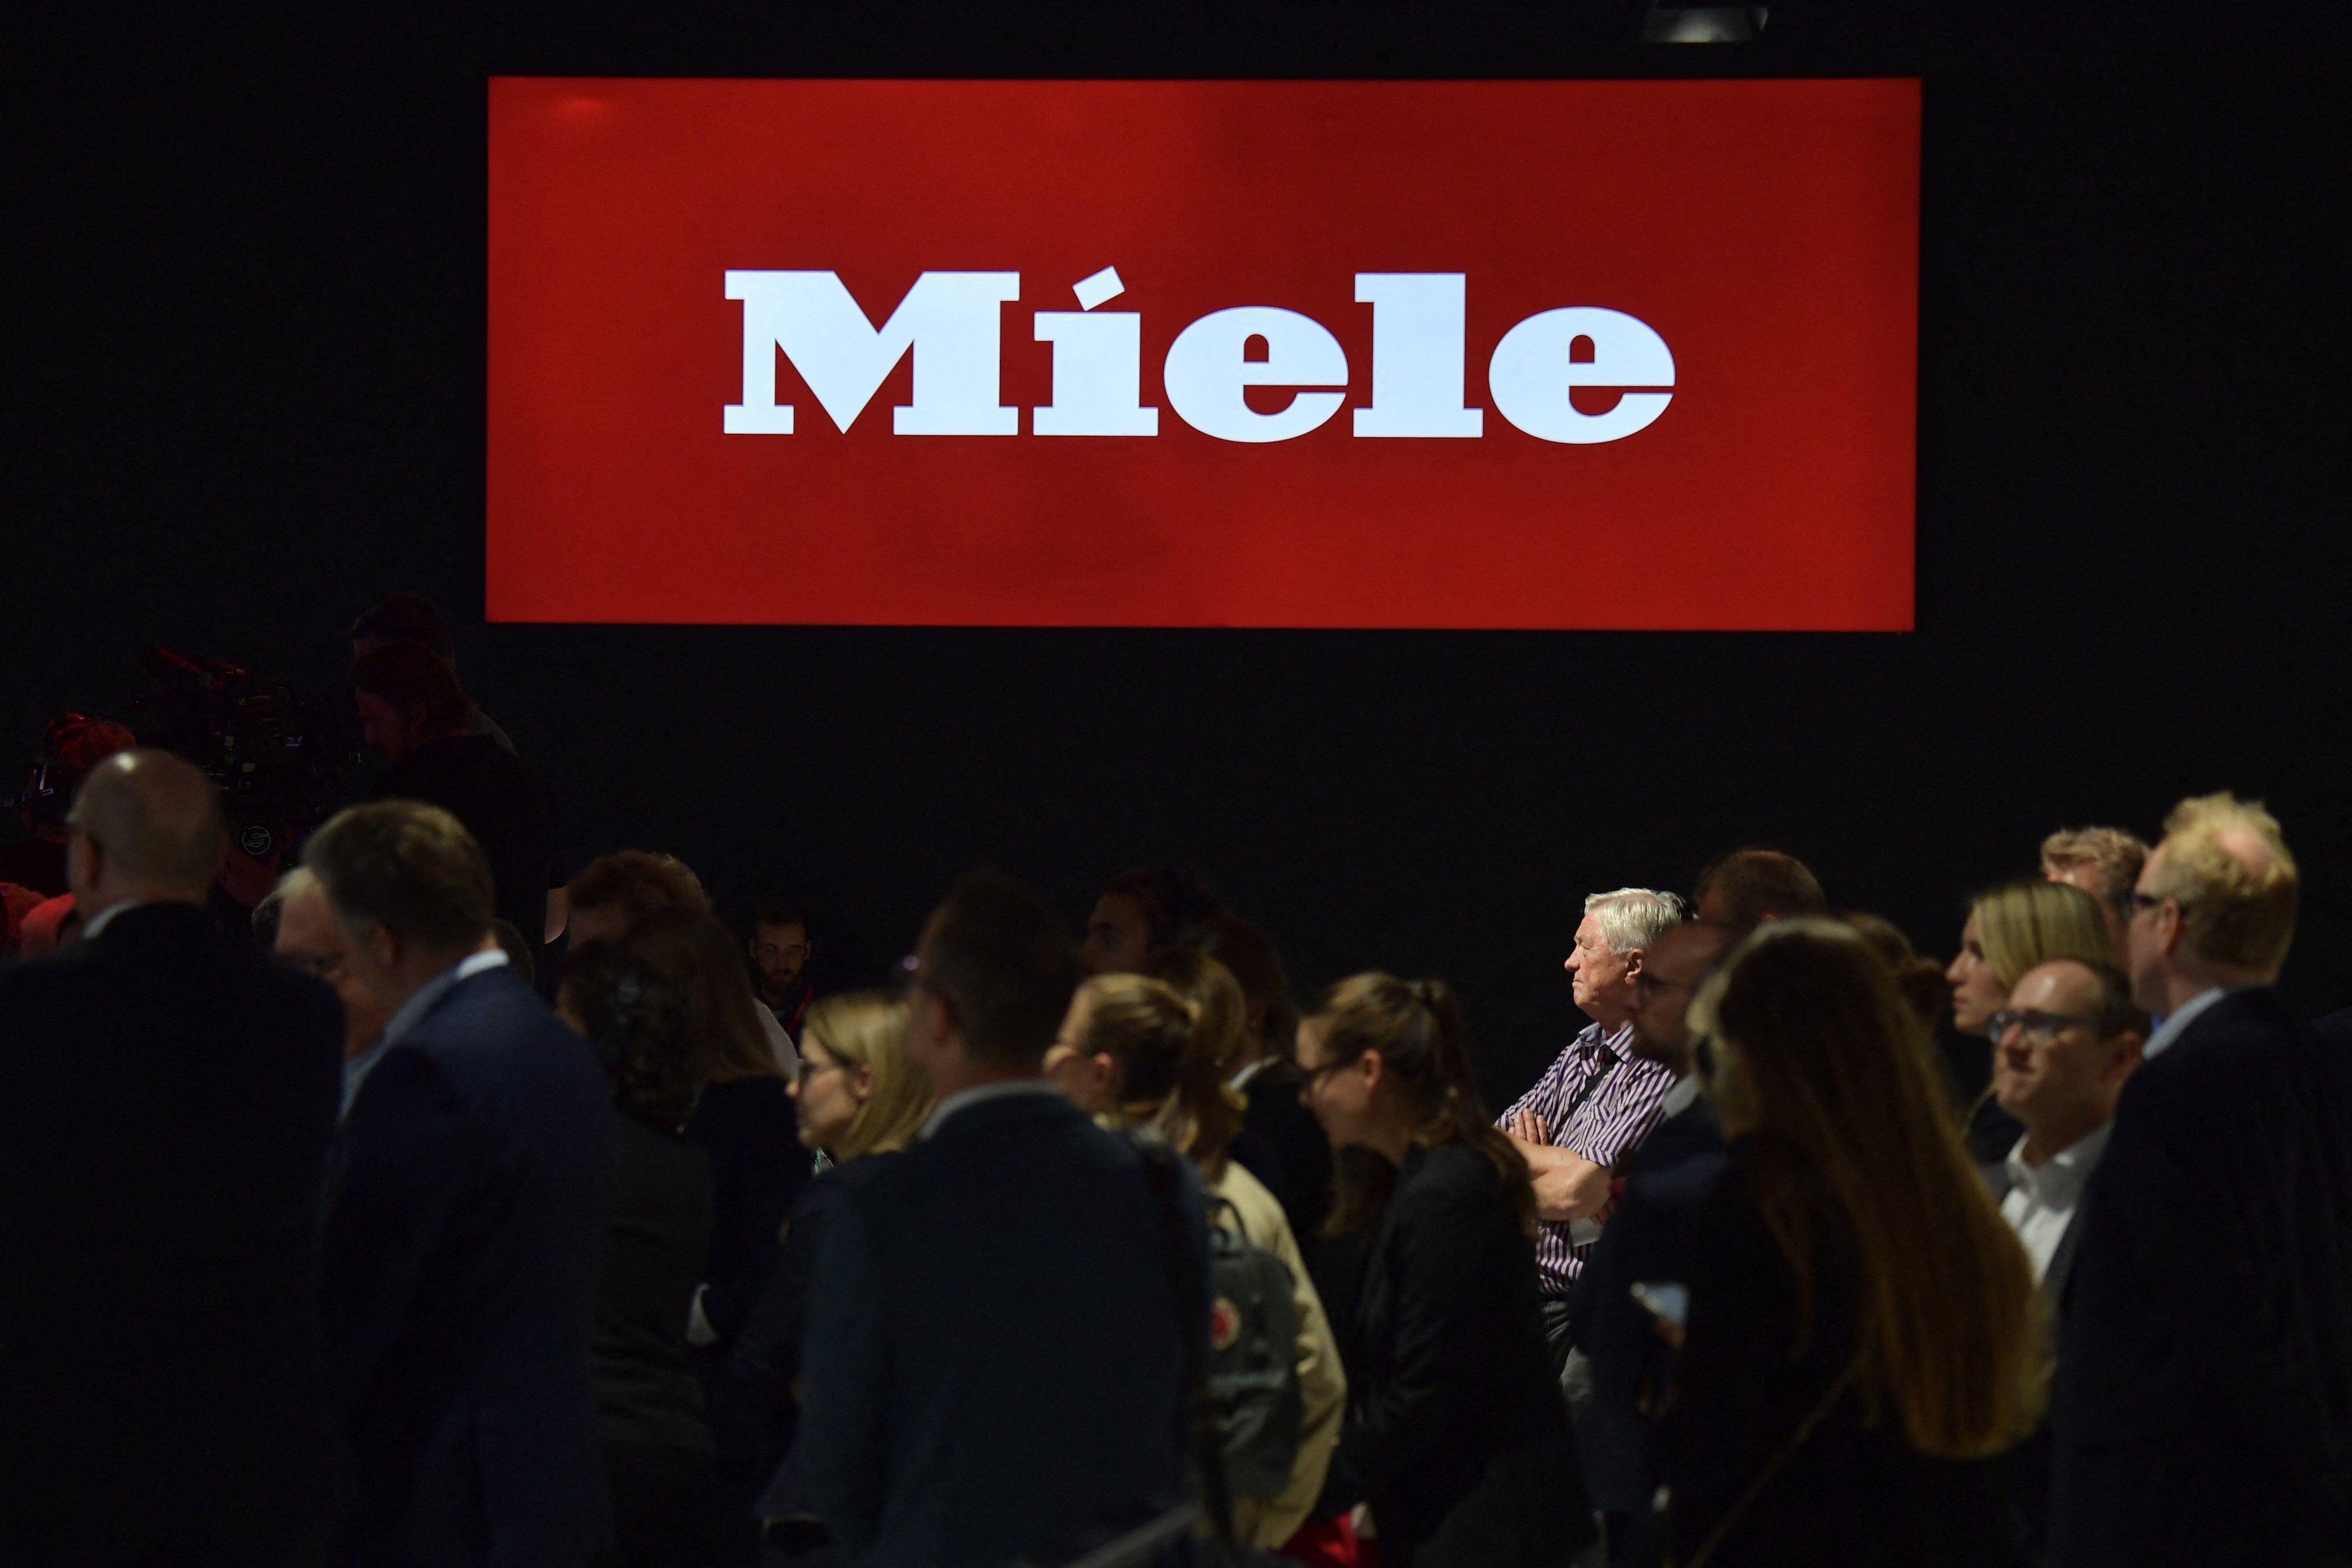 Miele holds an event at IFA, a major trade show for consumer electronics and home appliances, in Berlin on September 4, 2019. Photo:  AFP